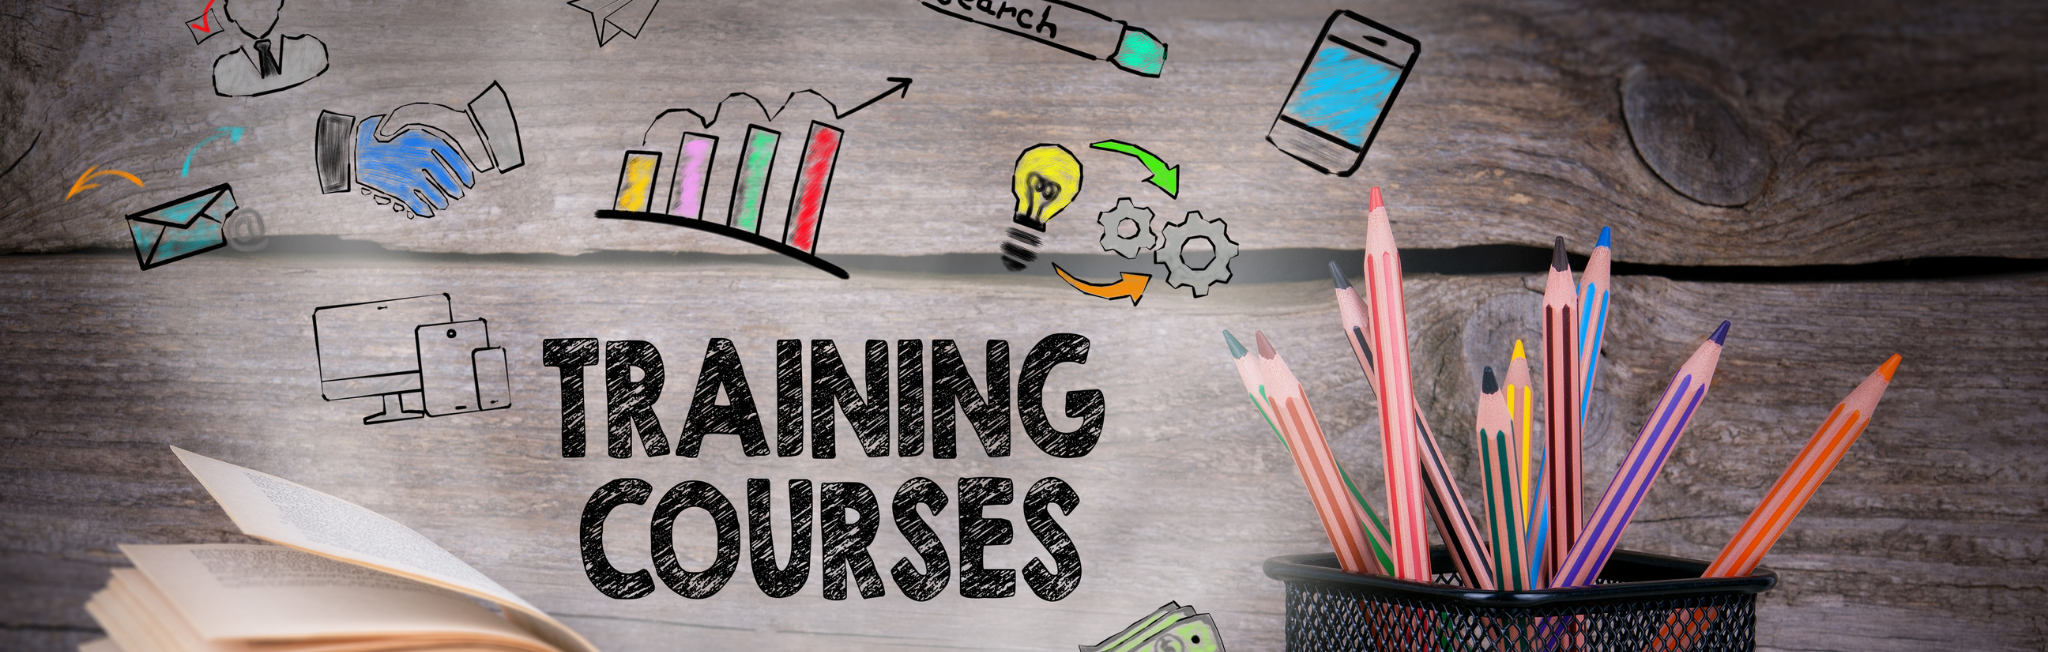 Upcoming courses web banner